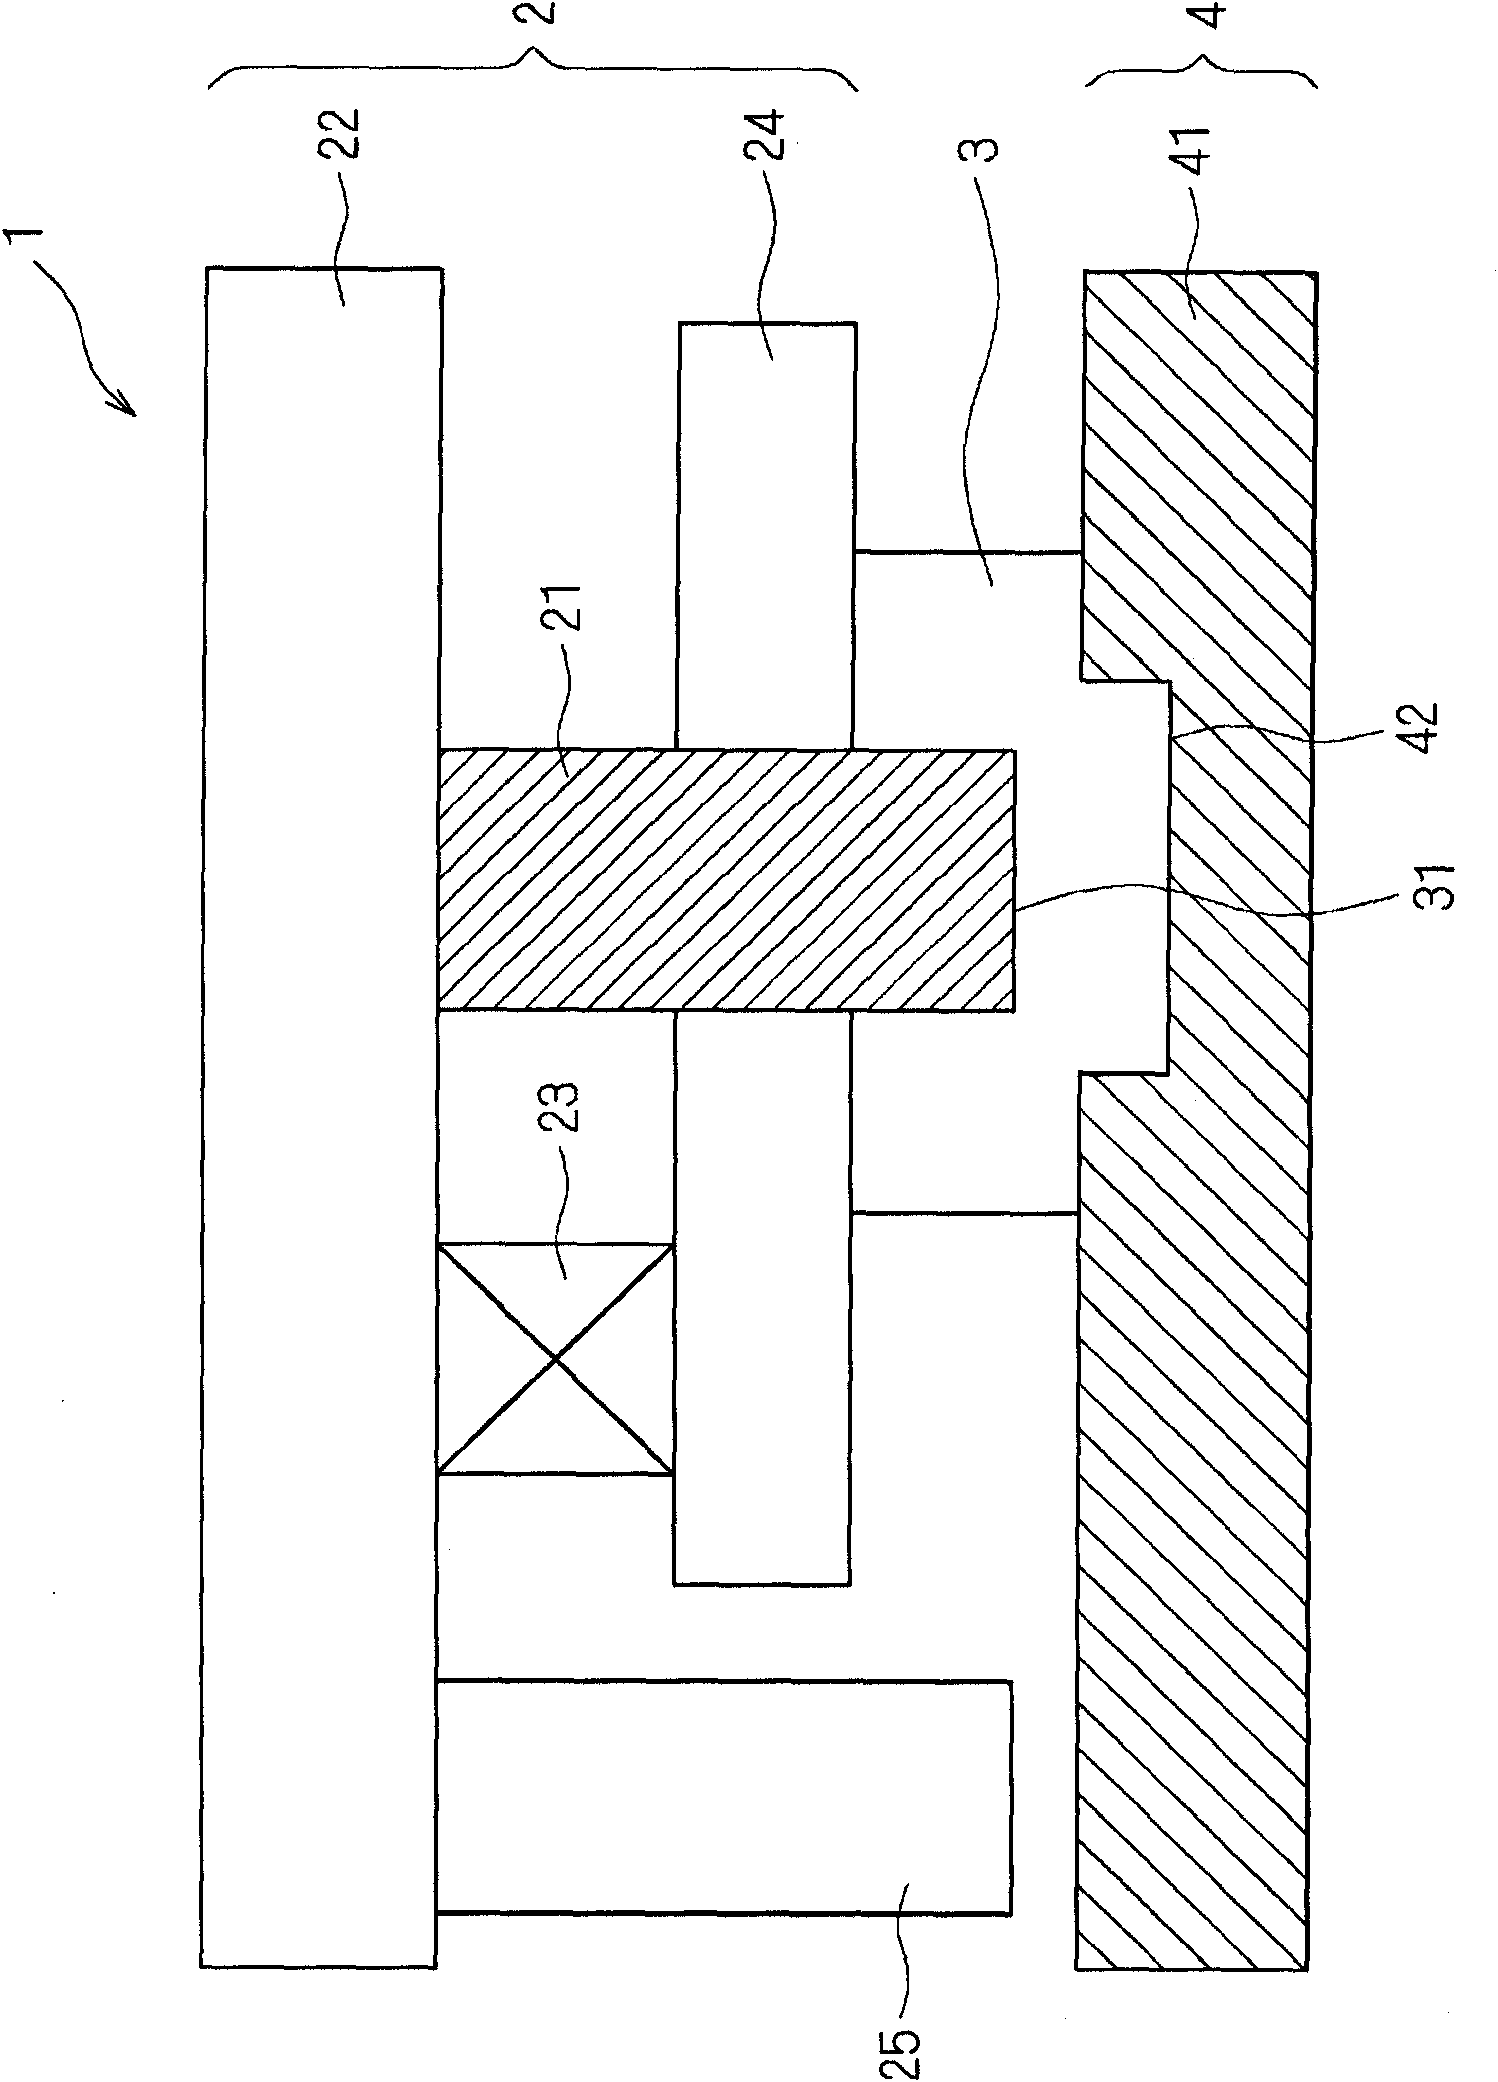 Apparatus for manufacturing a carrier tape and method for manufacturing a carrier tape